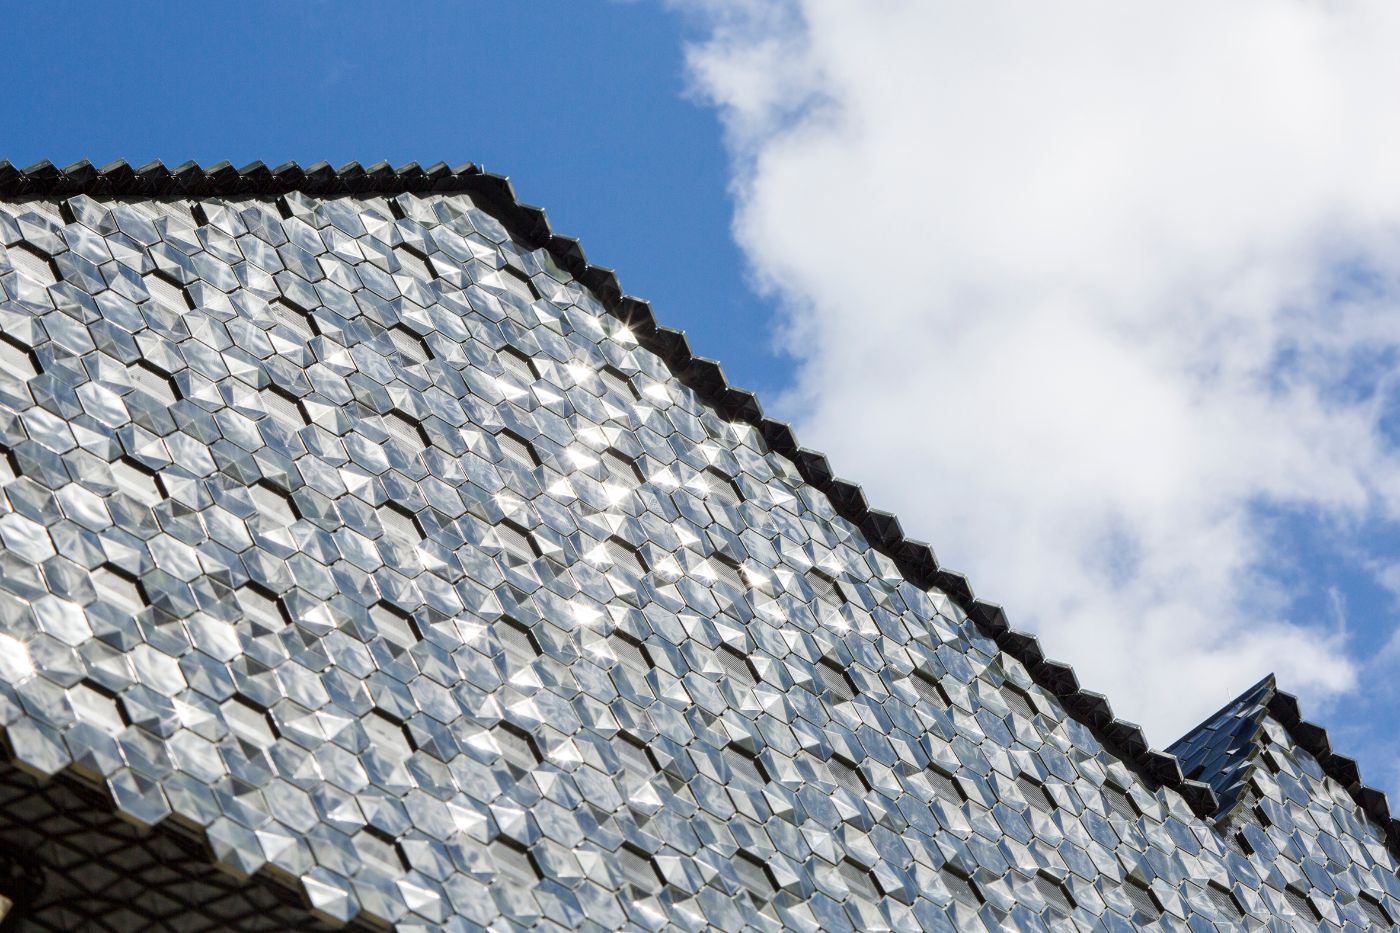 Roof section with hexagonal tiles shimmering in the sunlight, blue sky and white clouds above.